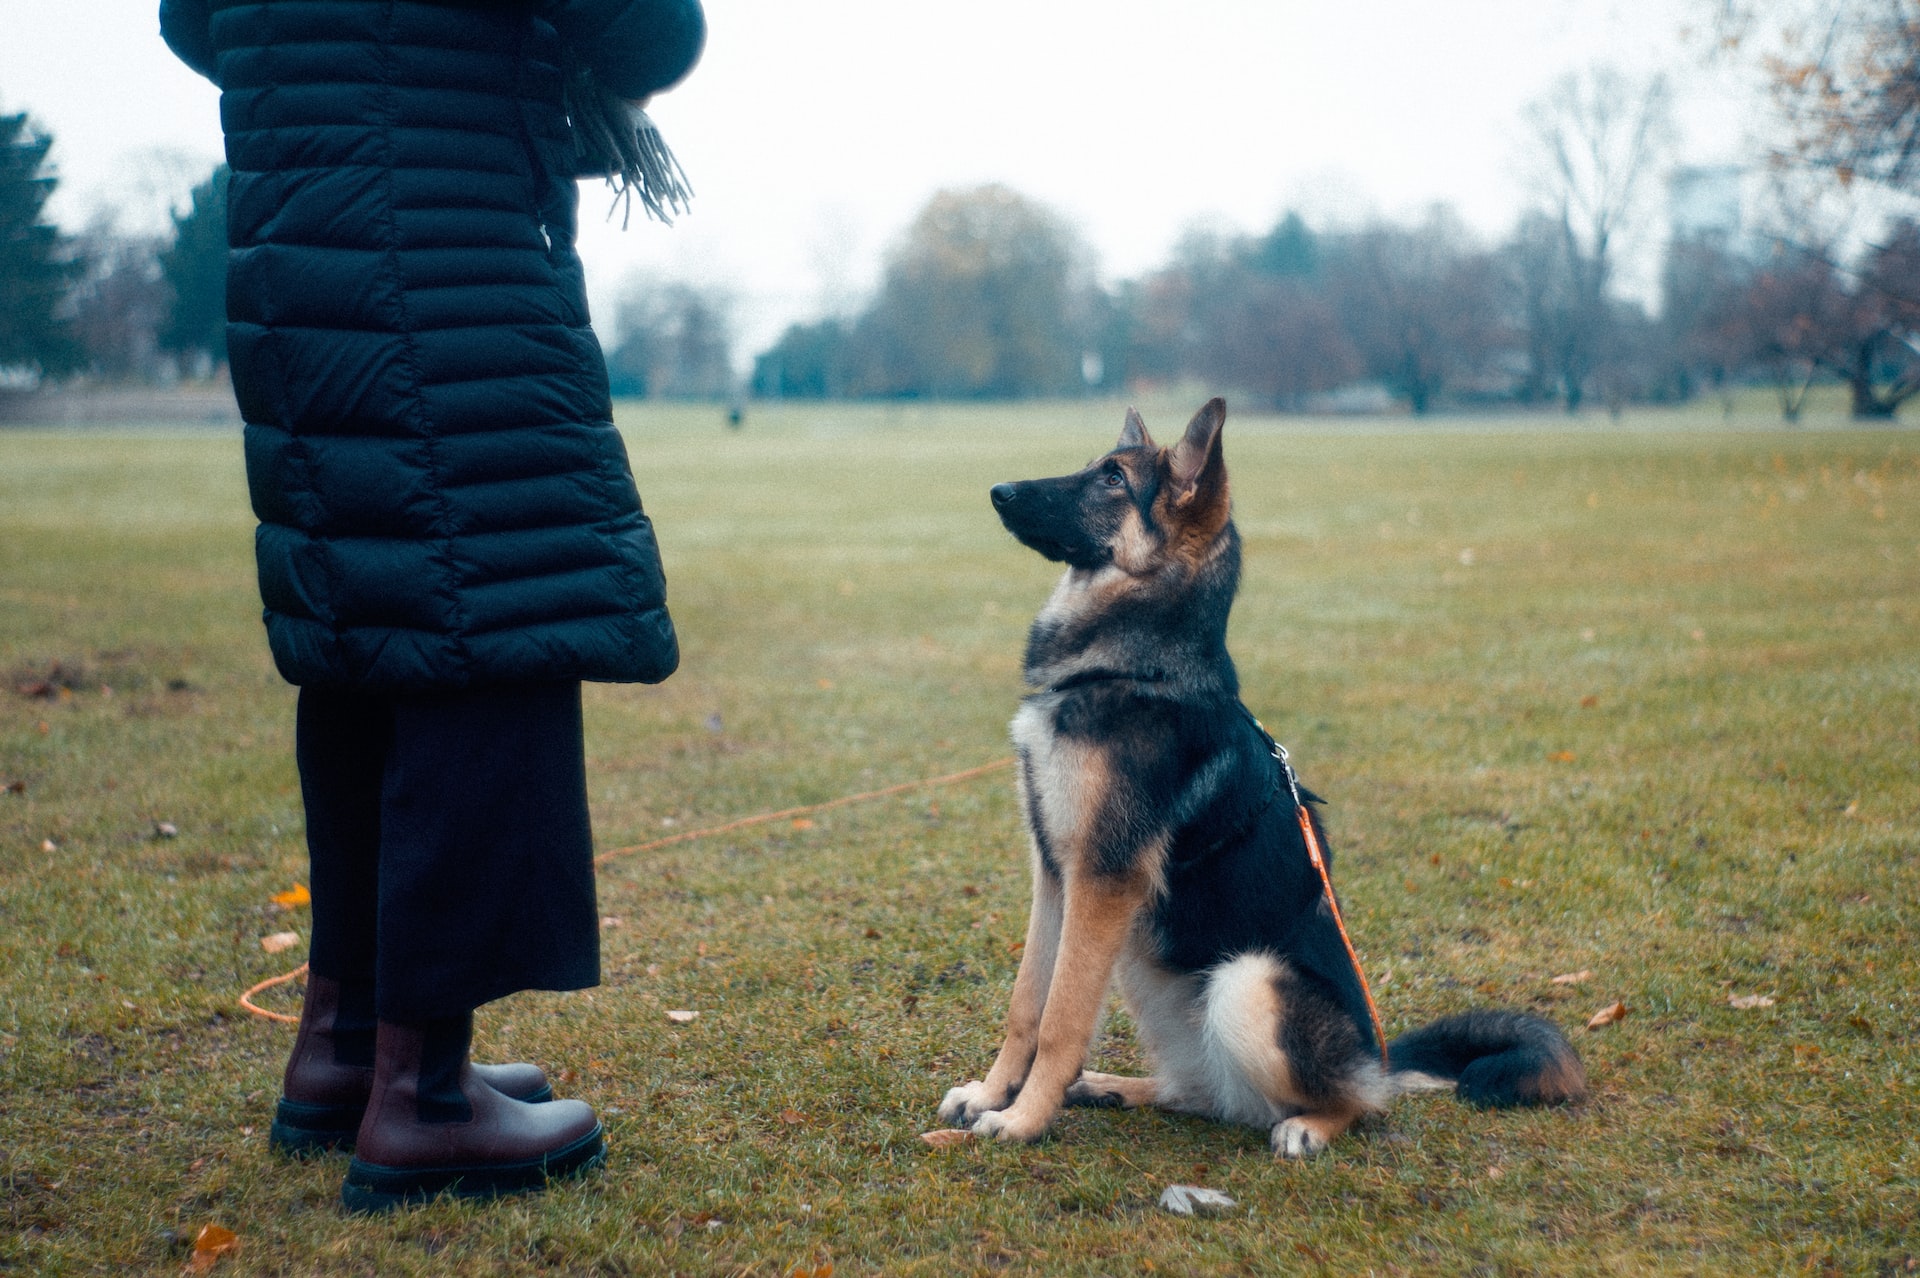 one of the dog Training Mistakes - inpatient